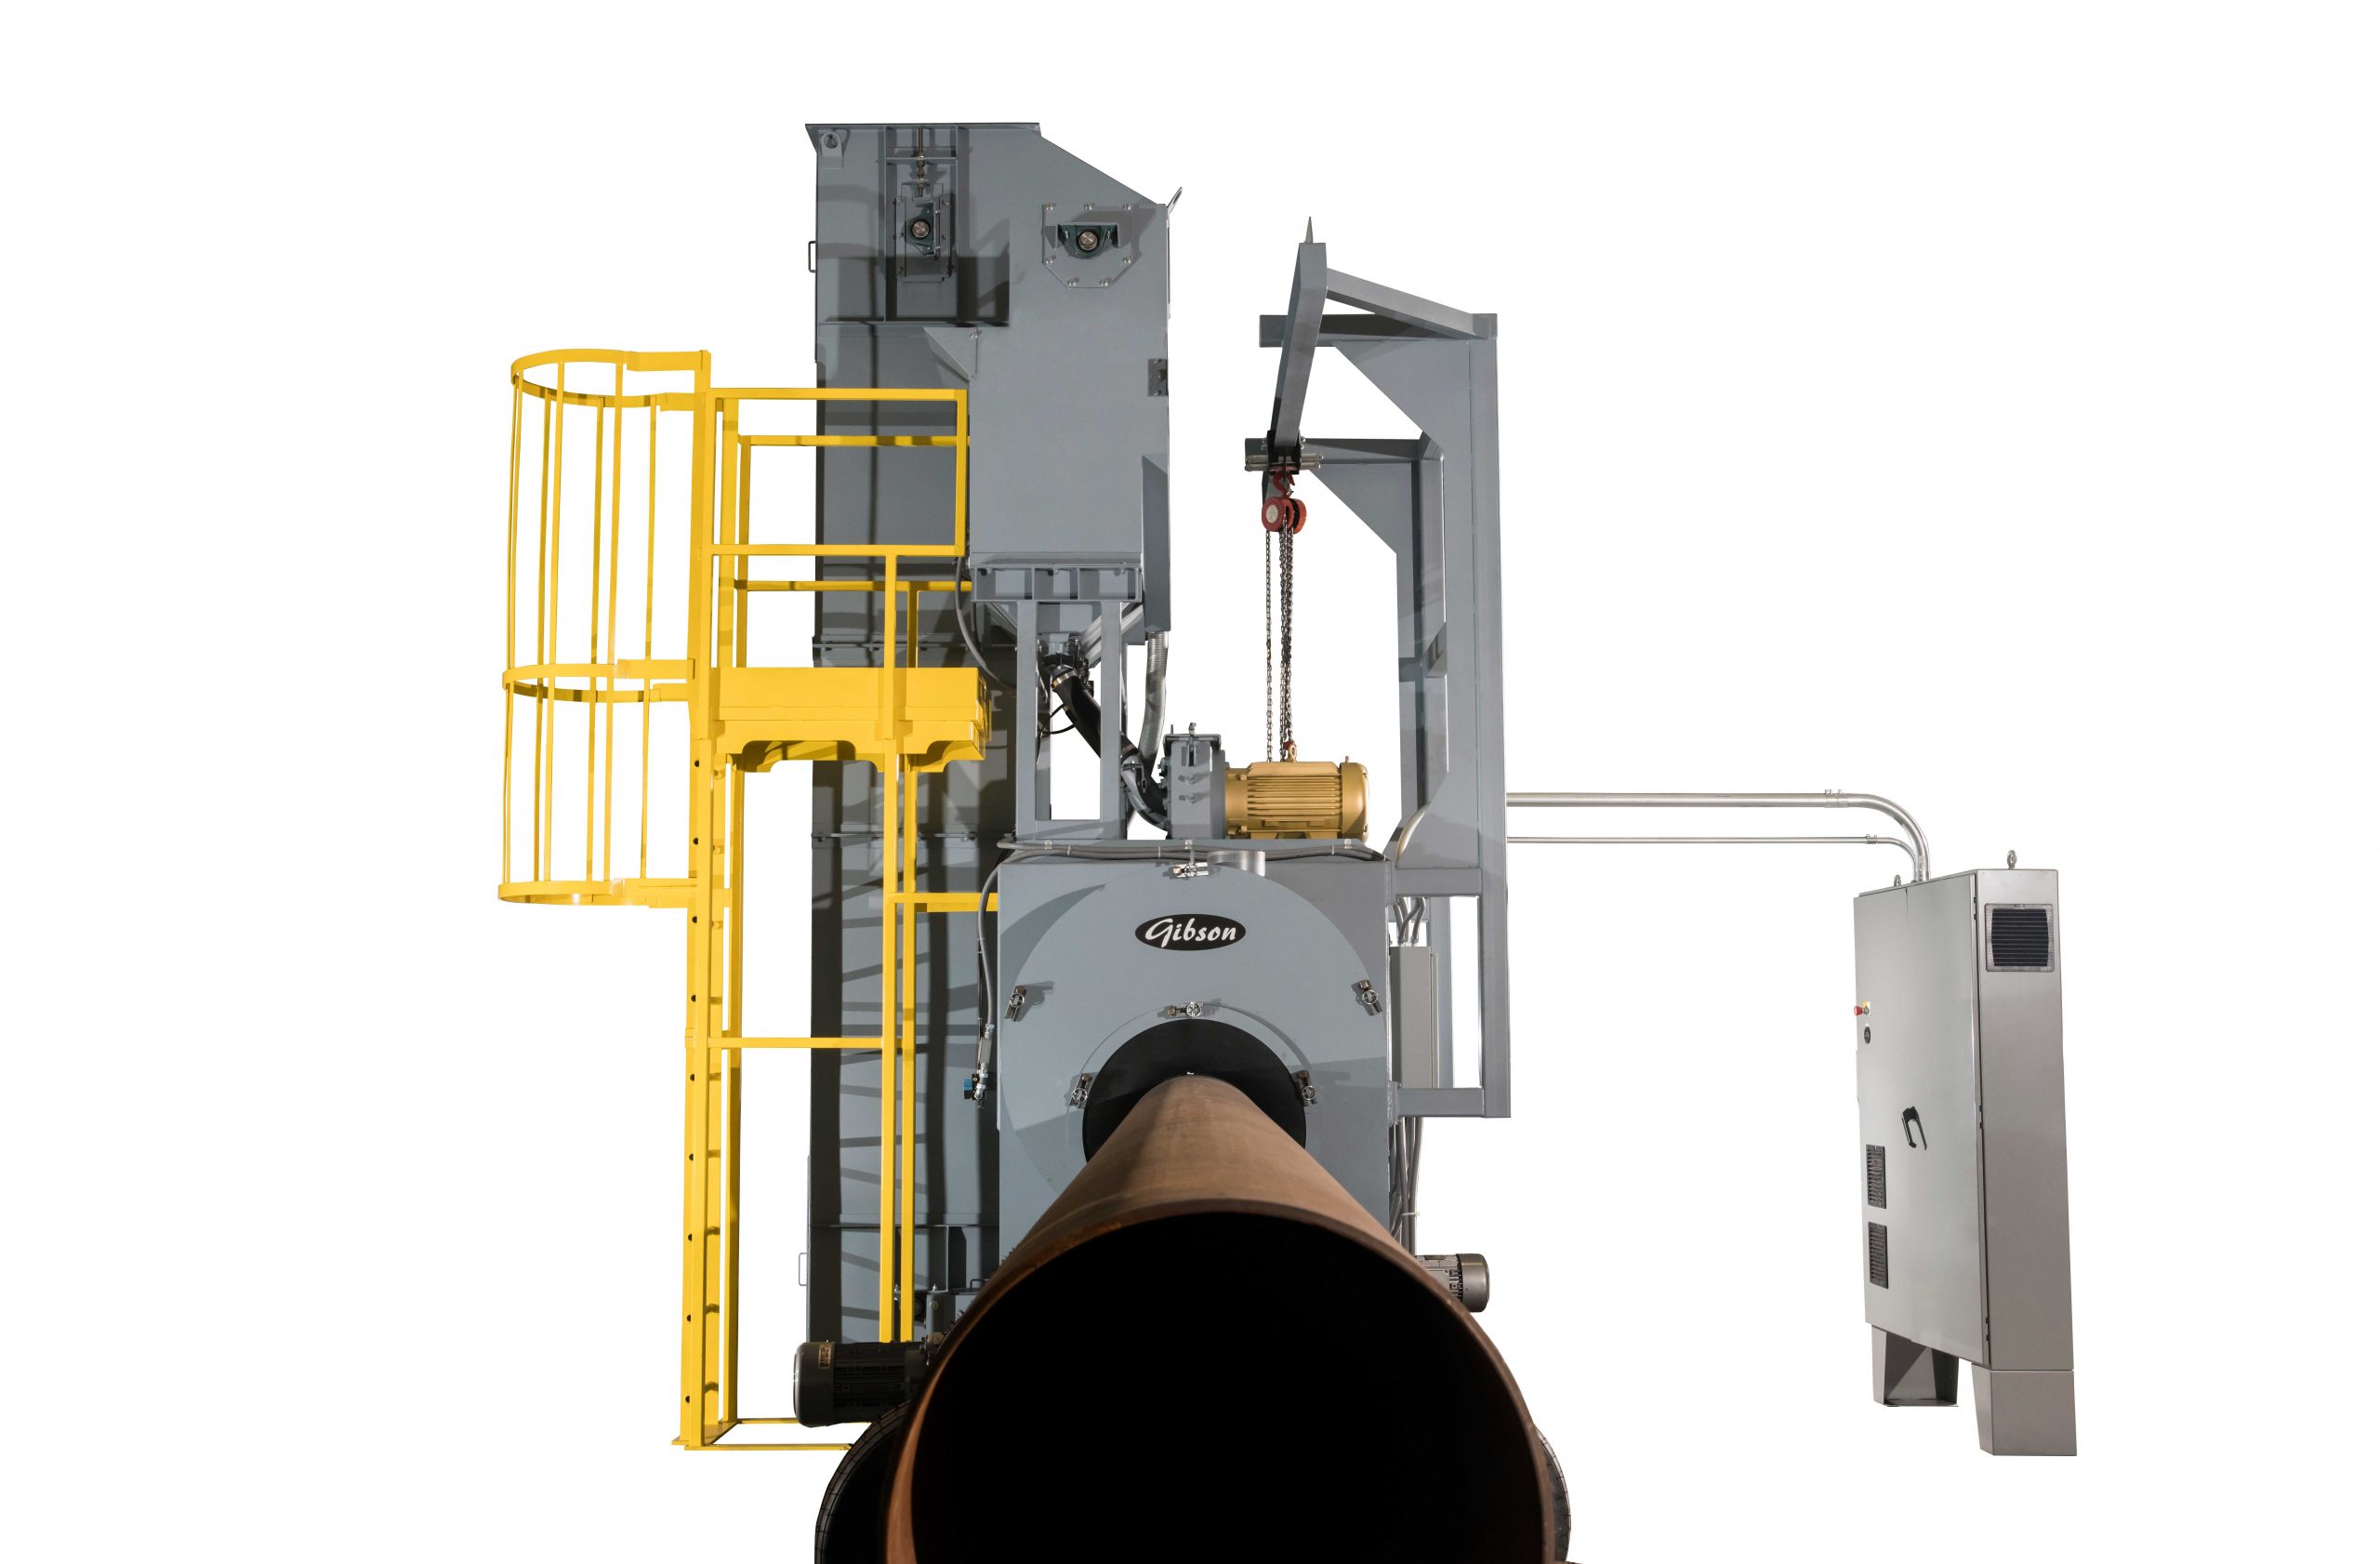 5-GIBSON-ABRASIVE-EQUIPMENT-PIPE-BLAST-SYSTEM-PB42-OD-PIPE-CLEANING-WEB-1-scaled